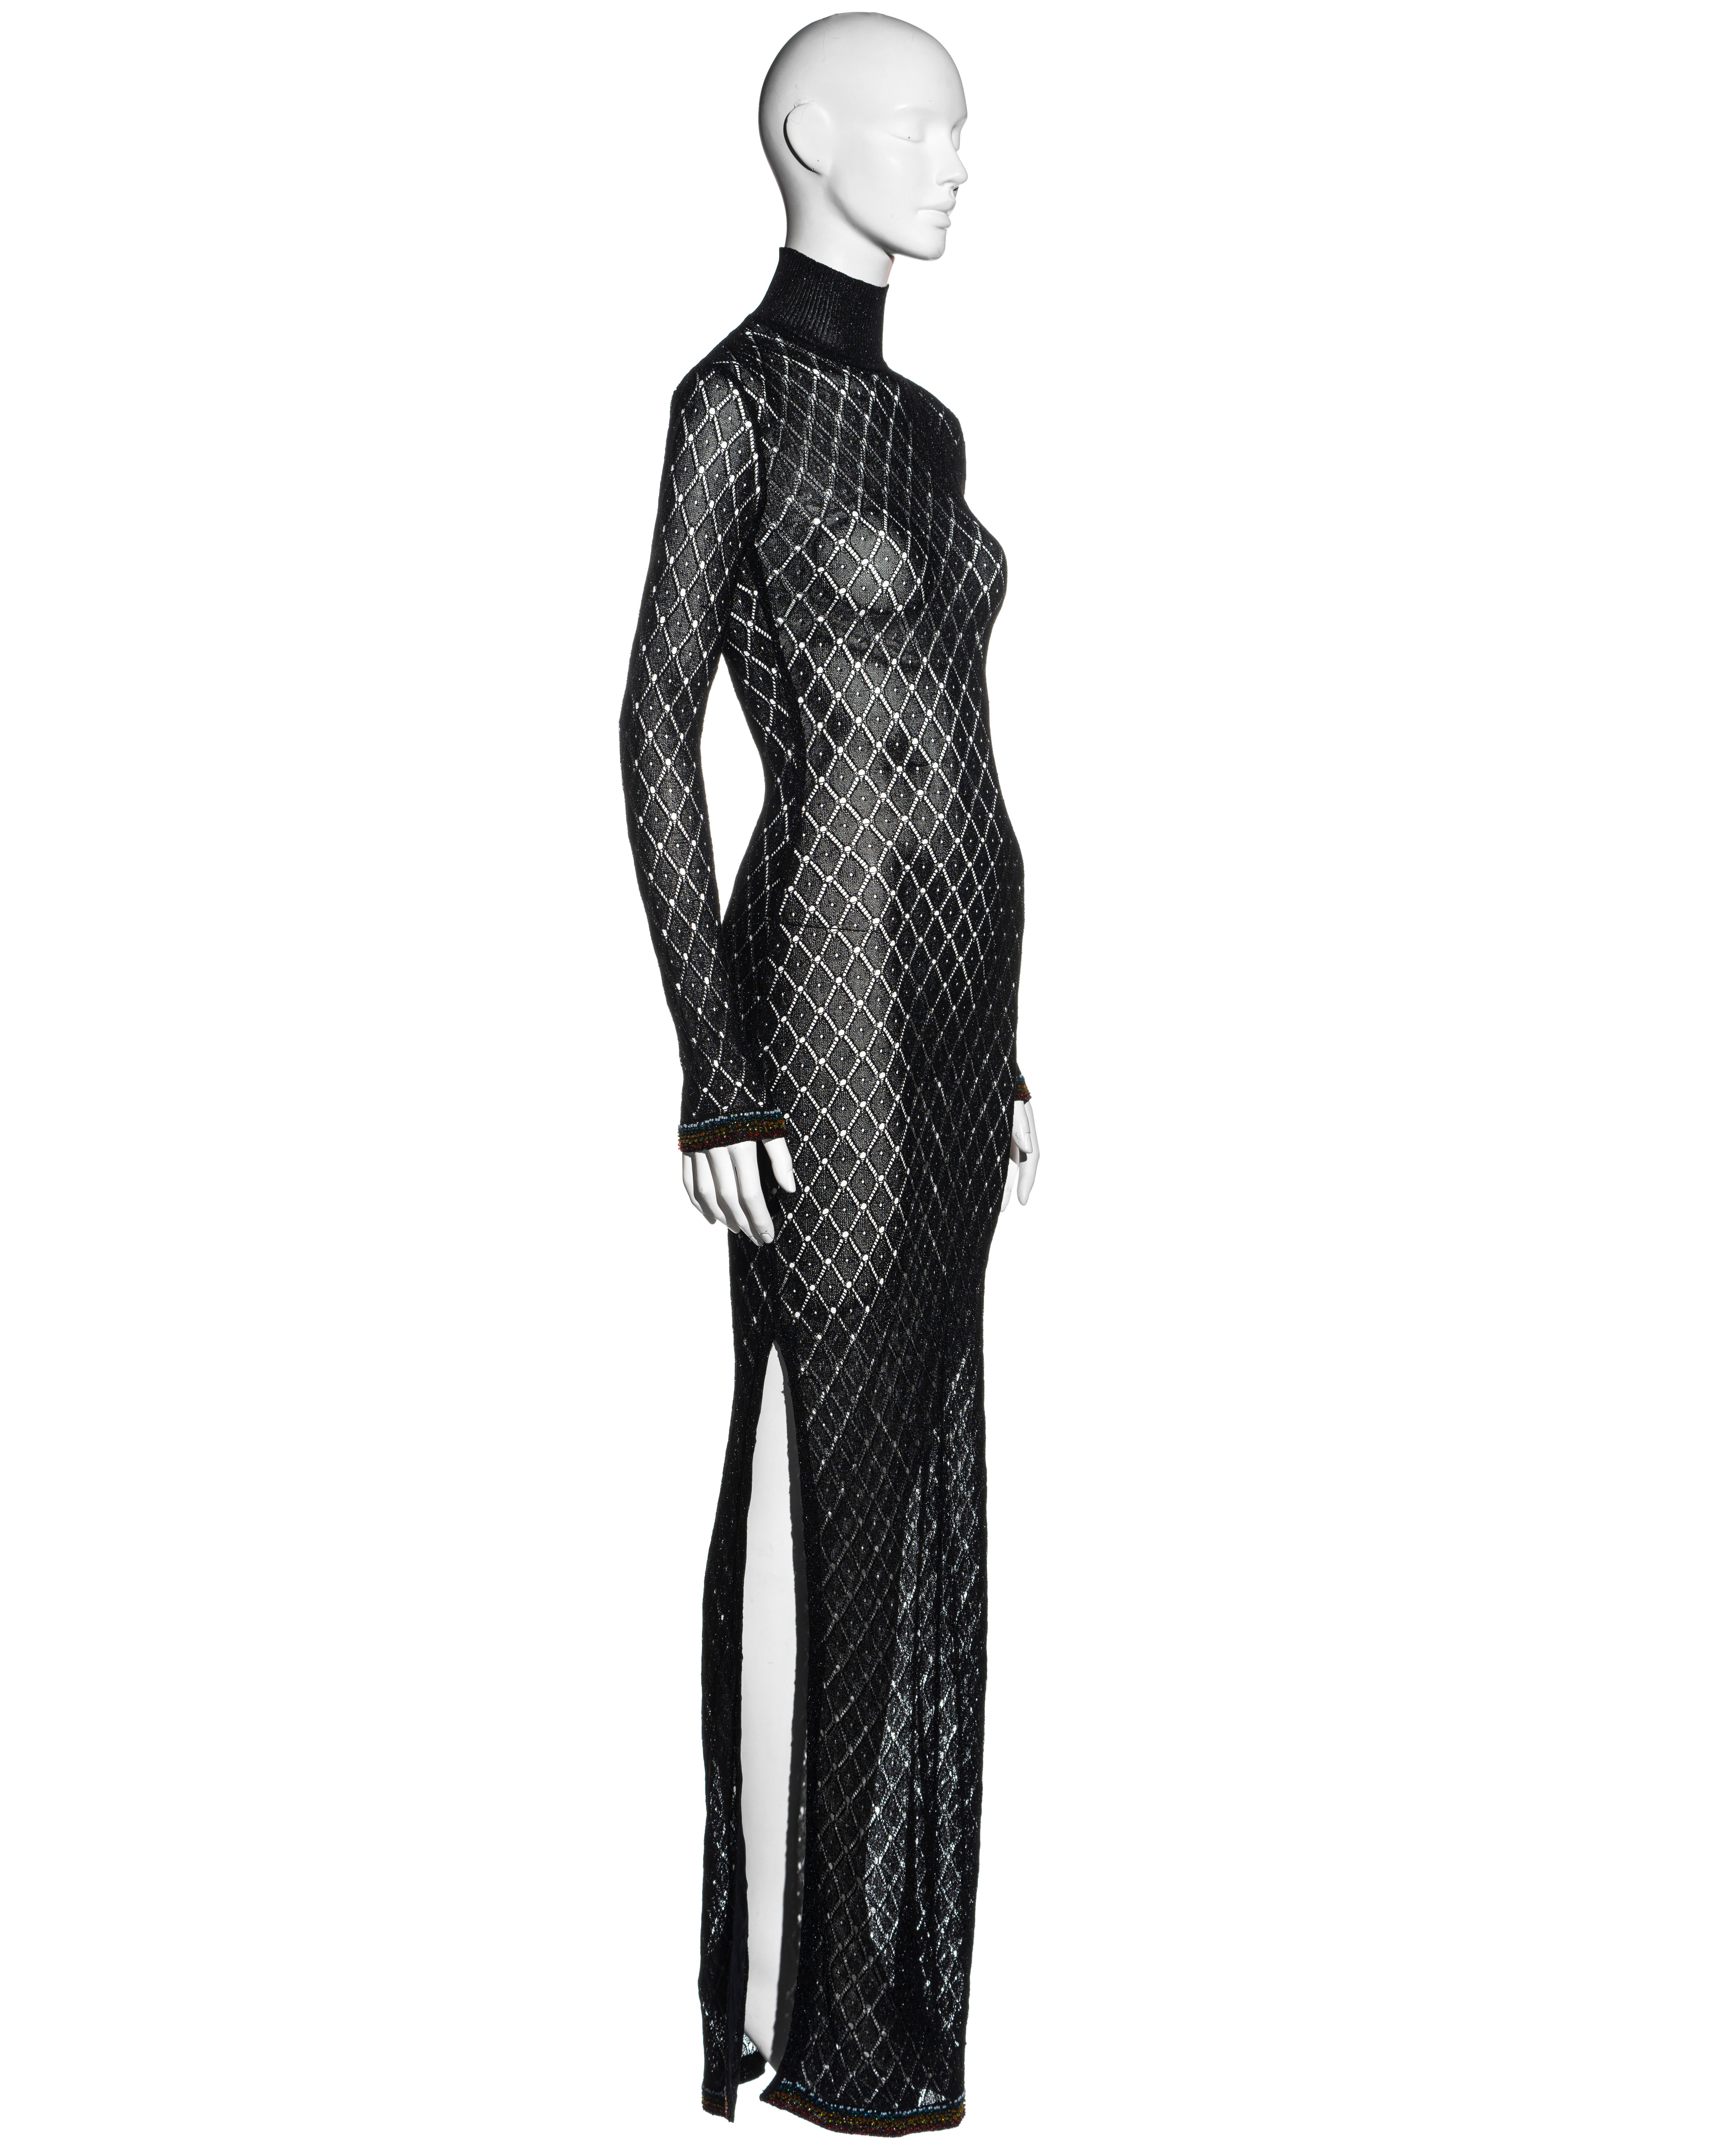 ▪ Christian Dior black open knit maxi dress
▪ Designed by John Galliano 
▪ Turtleneck 
▪ Open-knit in a fishnet pattern
▪ Long fitted sleeves 
▪ High leg slit 
▪ Multicoloured beading around cuffs and hemline 
▪ Sold with matching underdress
▪ FR 38